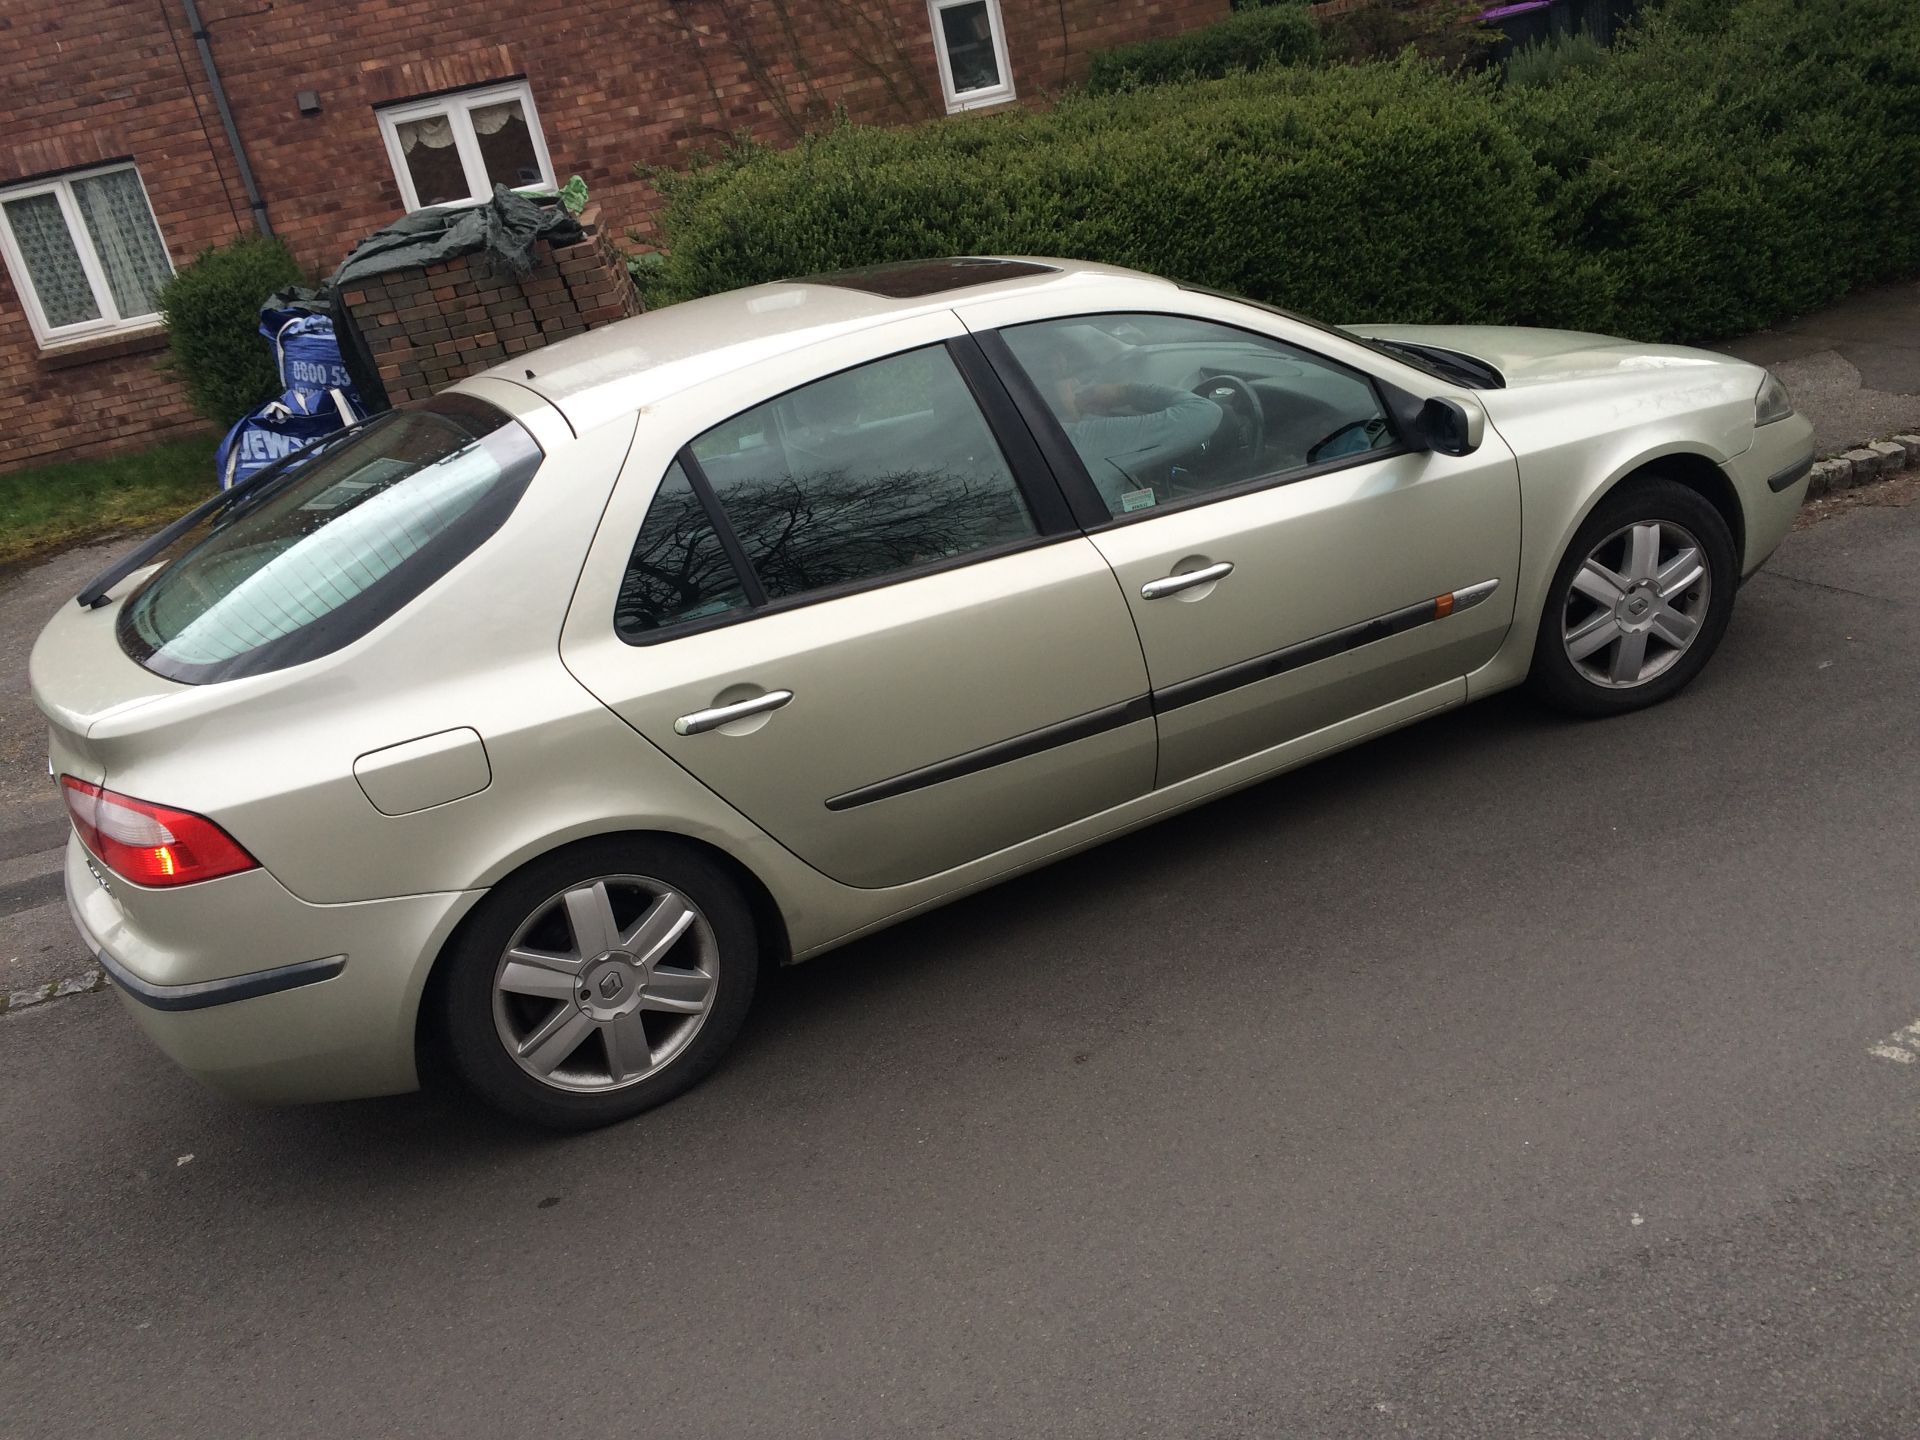 RENAULT LAGUNA 04 REG LEATHER INTERIOR CURRENT MOT UNTIL JULY 2015 BEING USED DAILY  85K MILES - Image 6 of 6